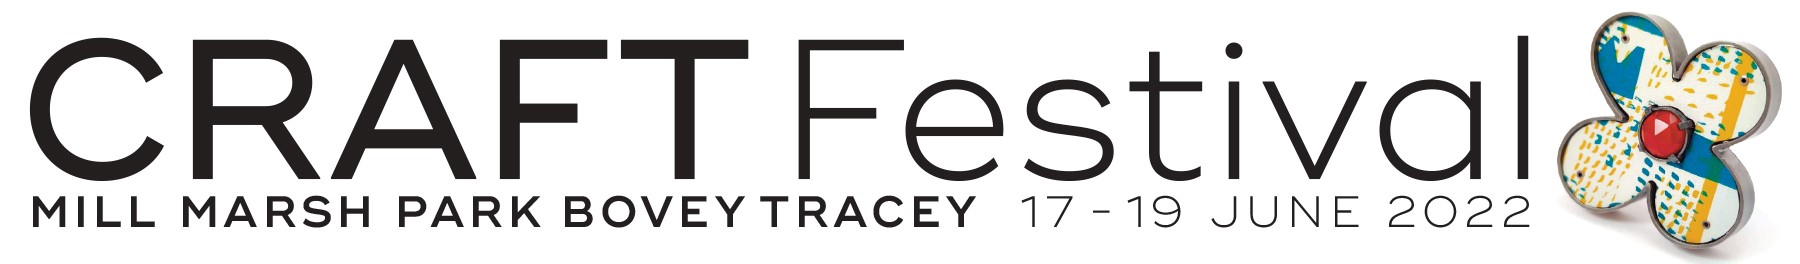 Craft Festival Bovey Tracey